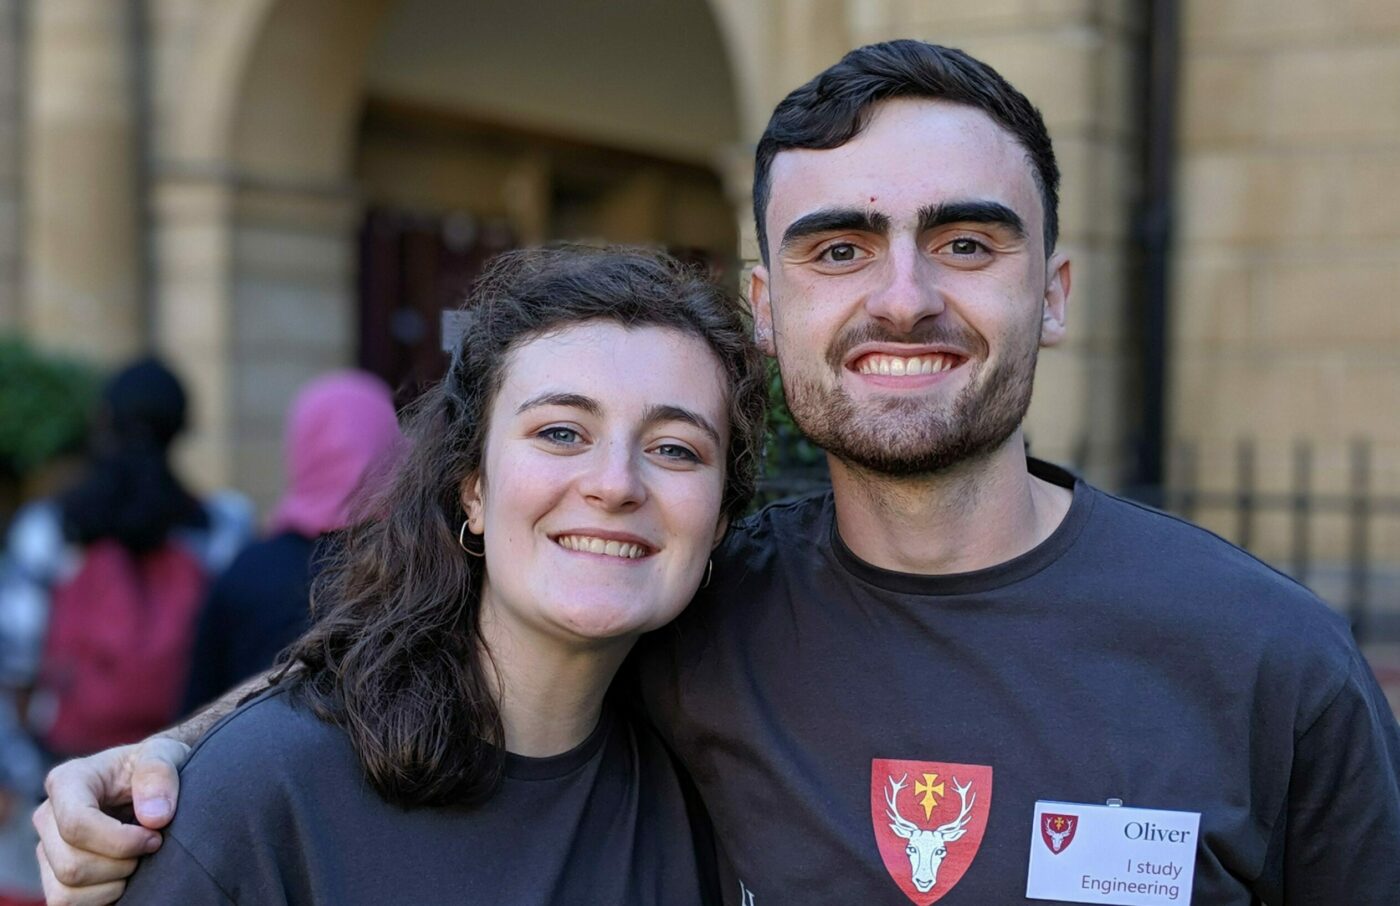 two young people in grey Hertford college t-shirts